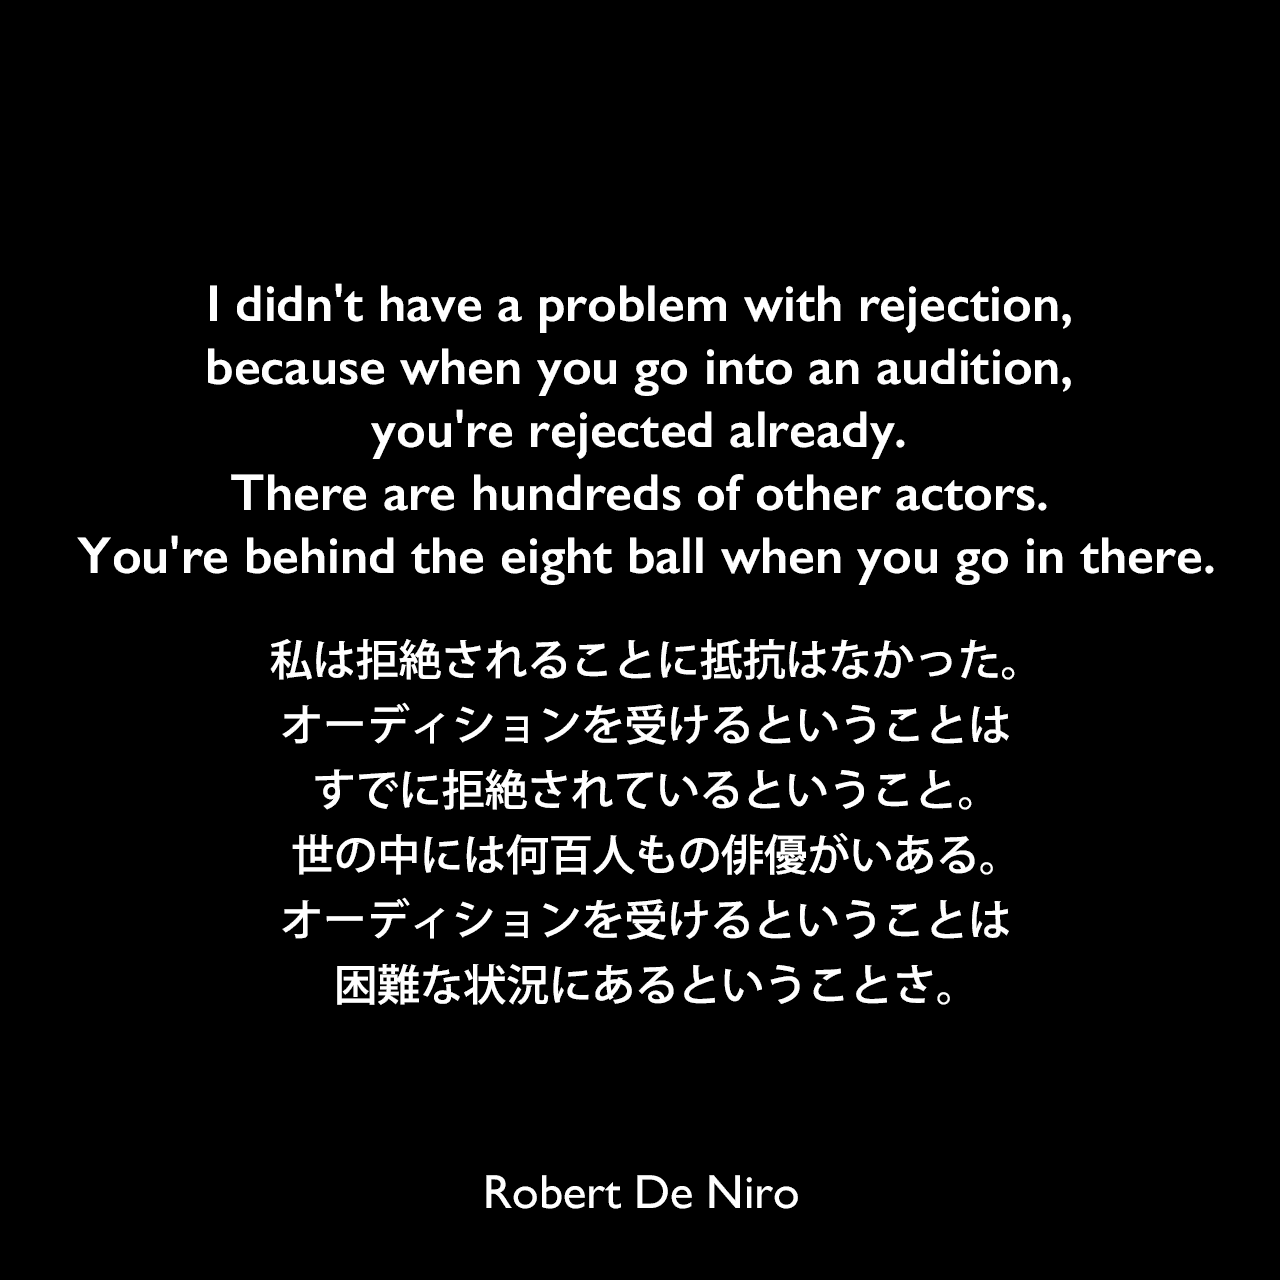 I didn't have a problem with rejection, because when you go into an audition, you're rejected already. There are hundreds of other actors. You're behind the eight ball when you go in there.私は拒絶されることに抵抗はなかった。オーディションを受けるということはすでに拒絶されているということ。世の中には何百人もの俳優がいある。オーディションを受けるということは困難な状況にあるということさ。Robert De Niro